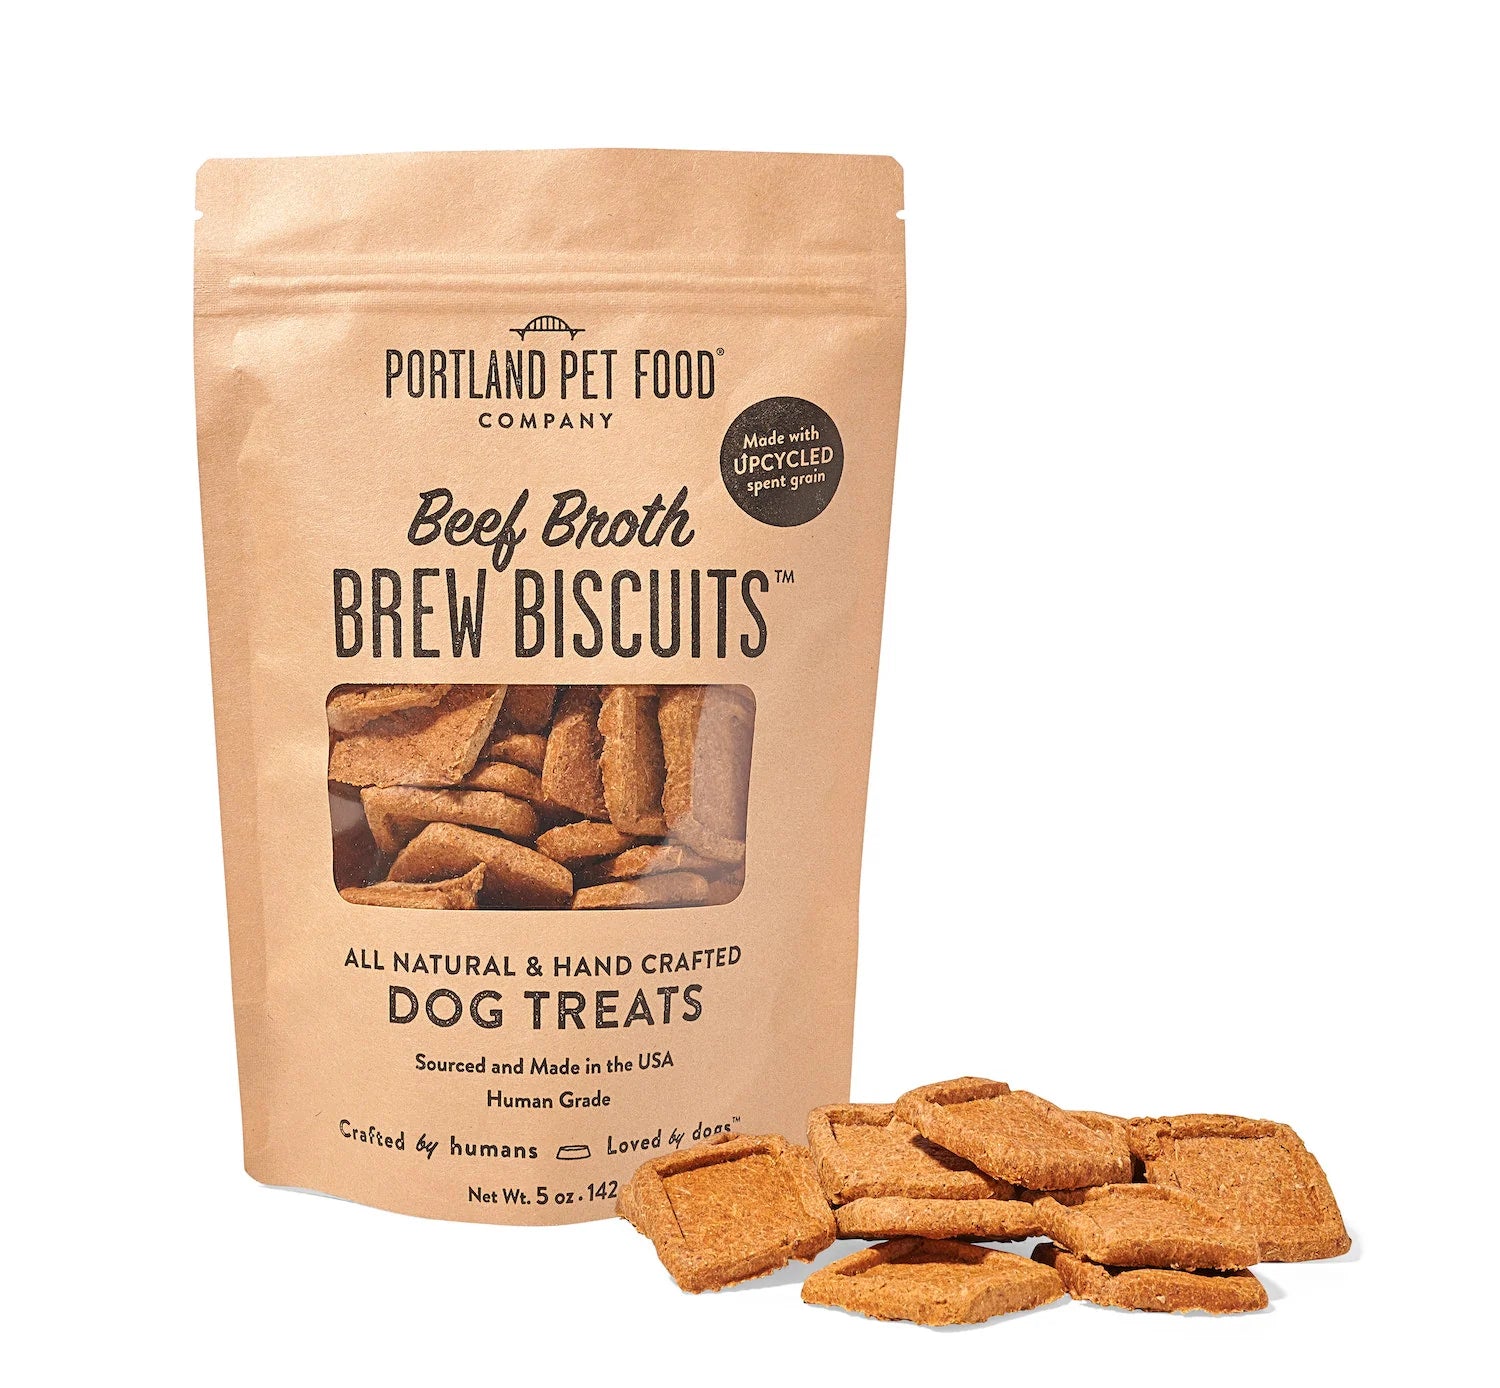 Portland Pet Food Brew Biscuits with Beef Broth